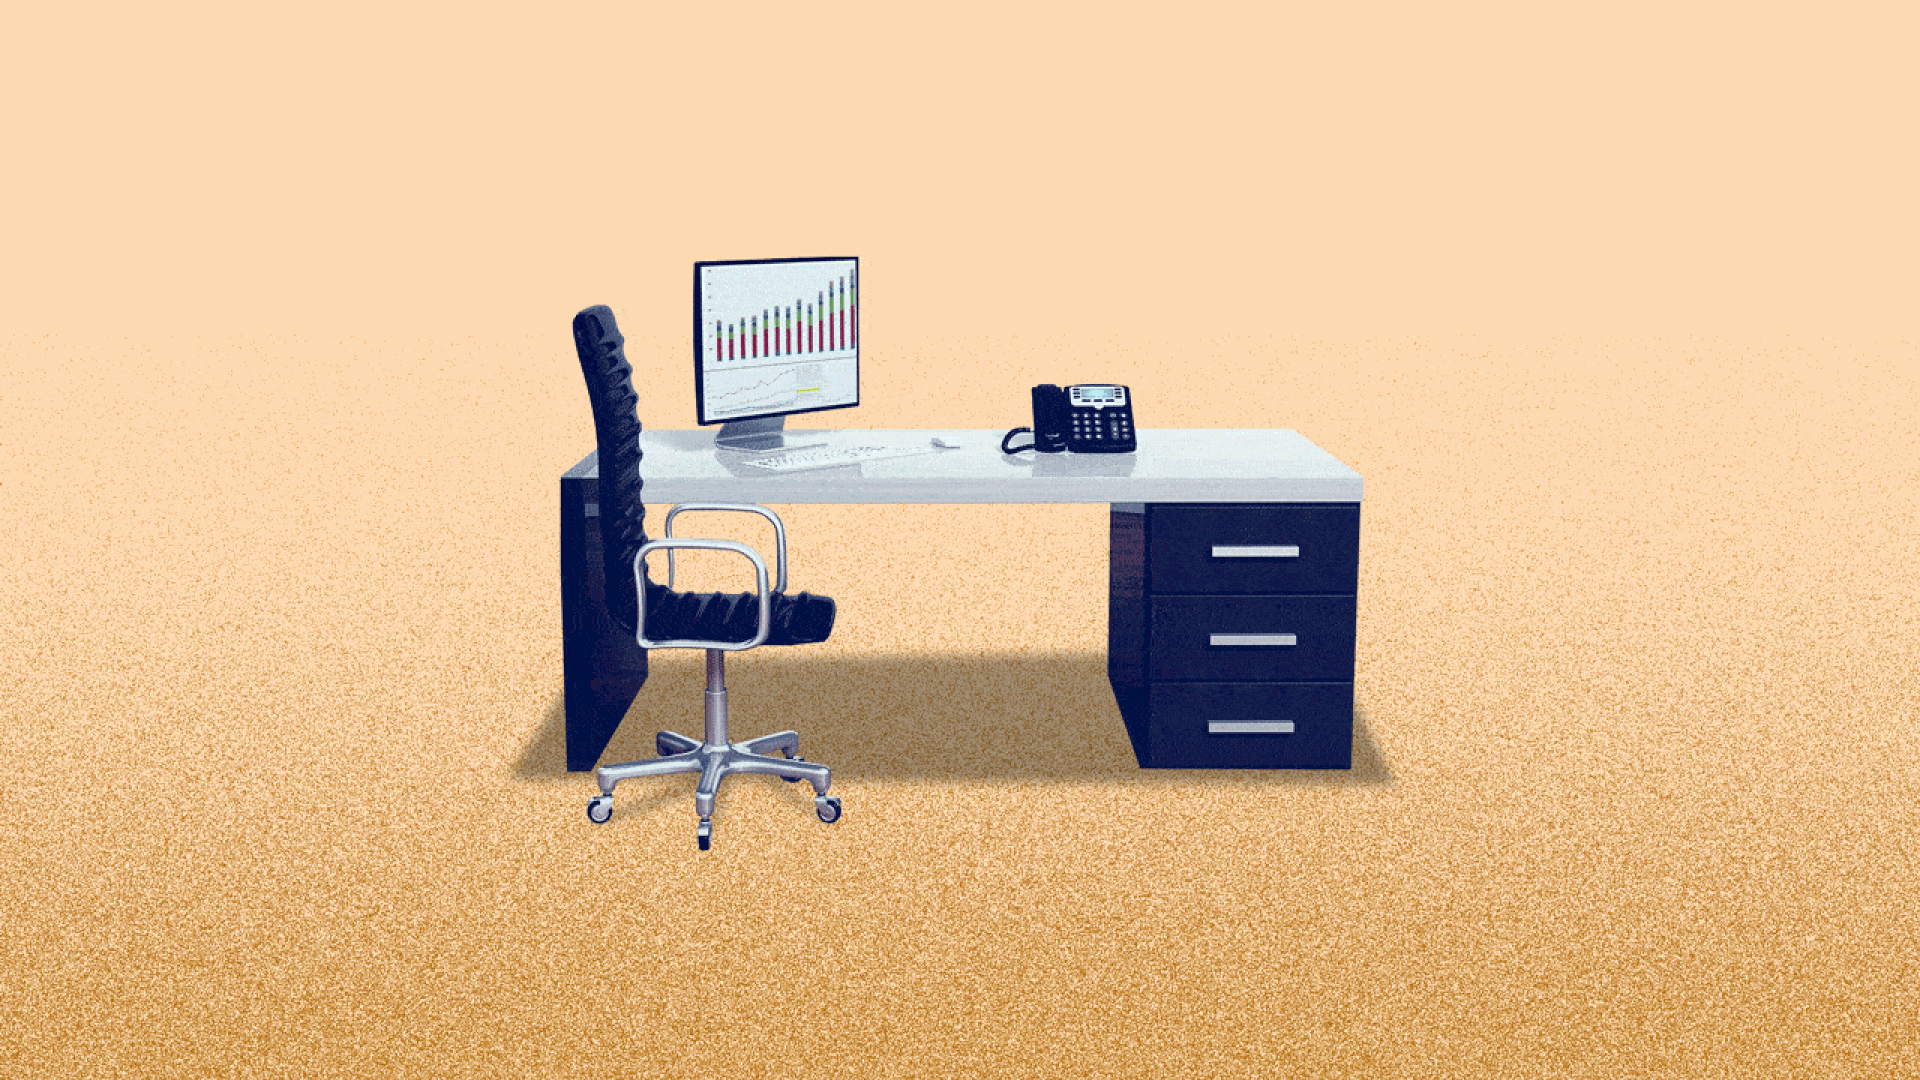 Animated illustration of a desk out in the desert with a tumbleweed blowing by.